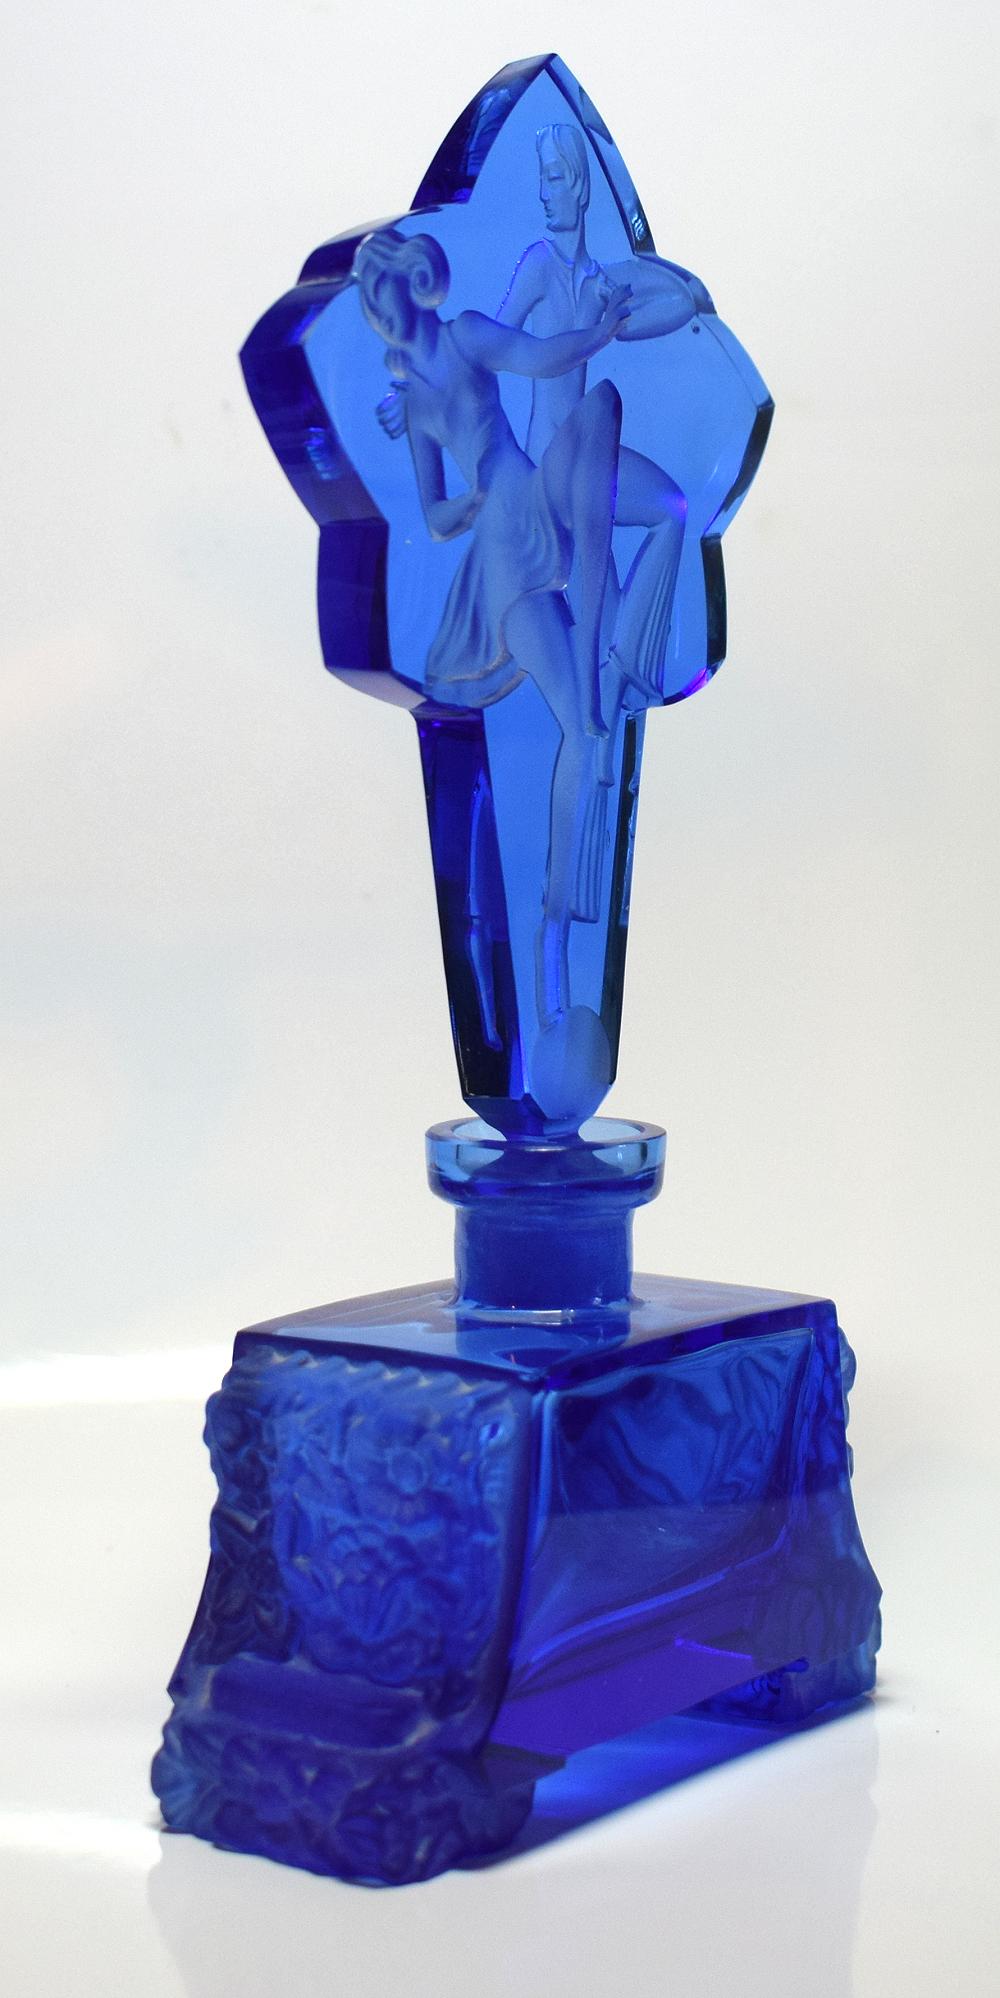 For your consideration is this impressively tall Art Deco style Bristol blue glass perfume bottle. Depicts two dancers on the stopper and an embossed foliage design to the base. Lovely item with no damage, just minor signs of use.